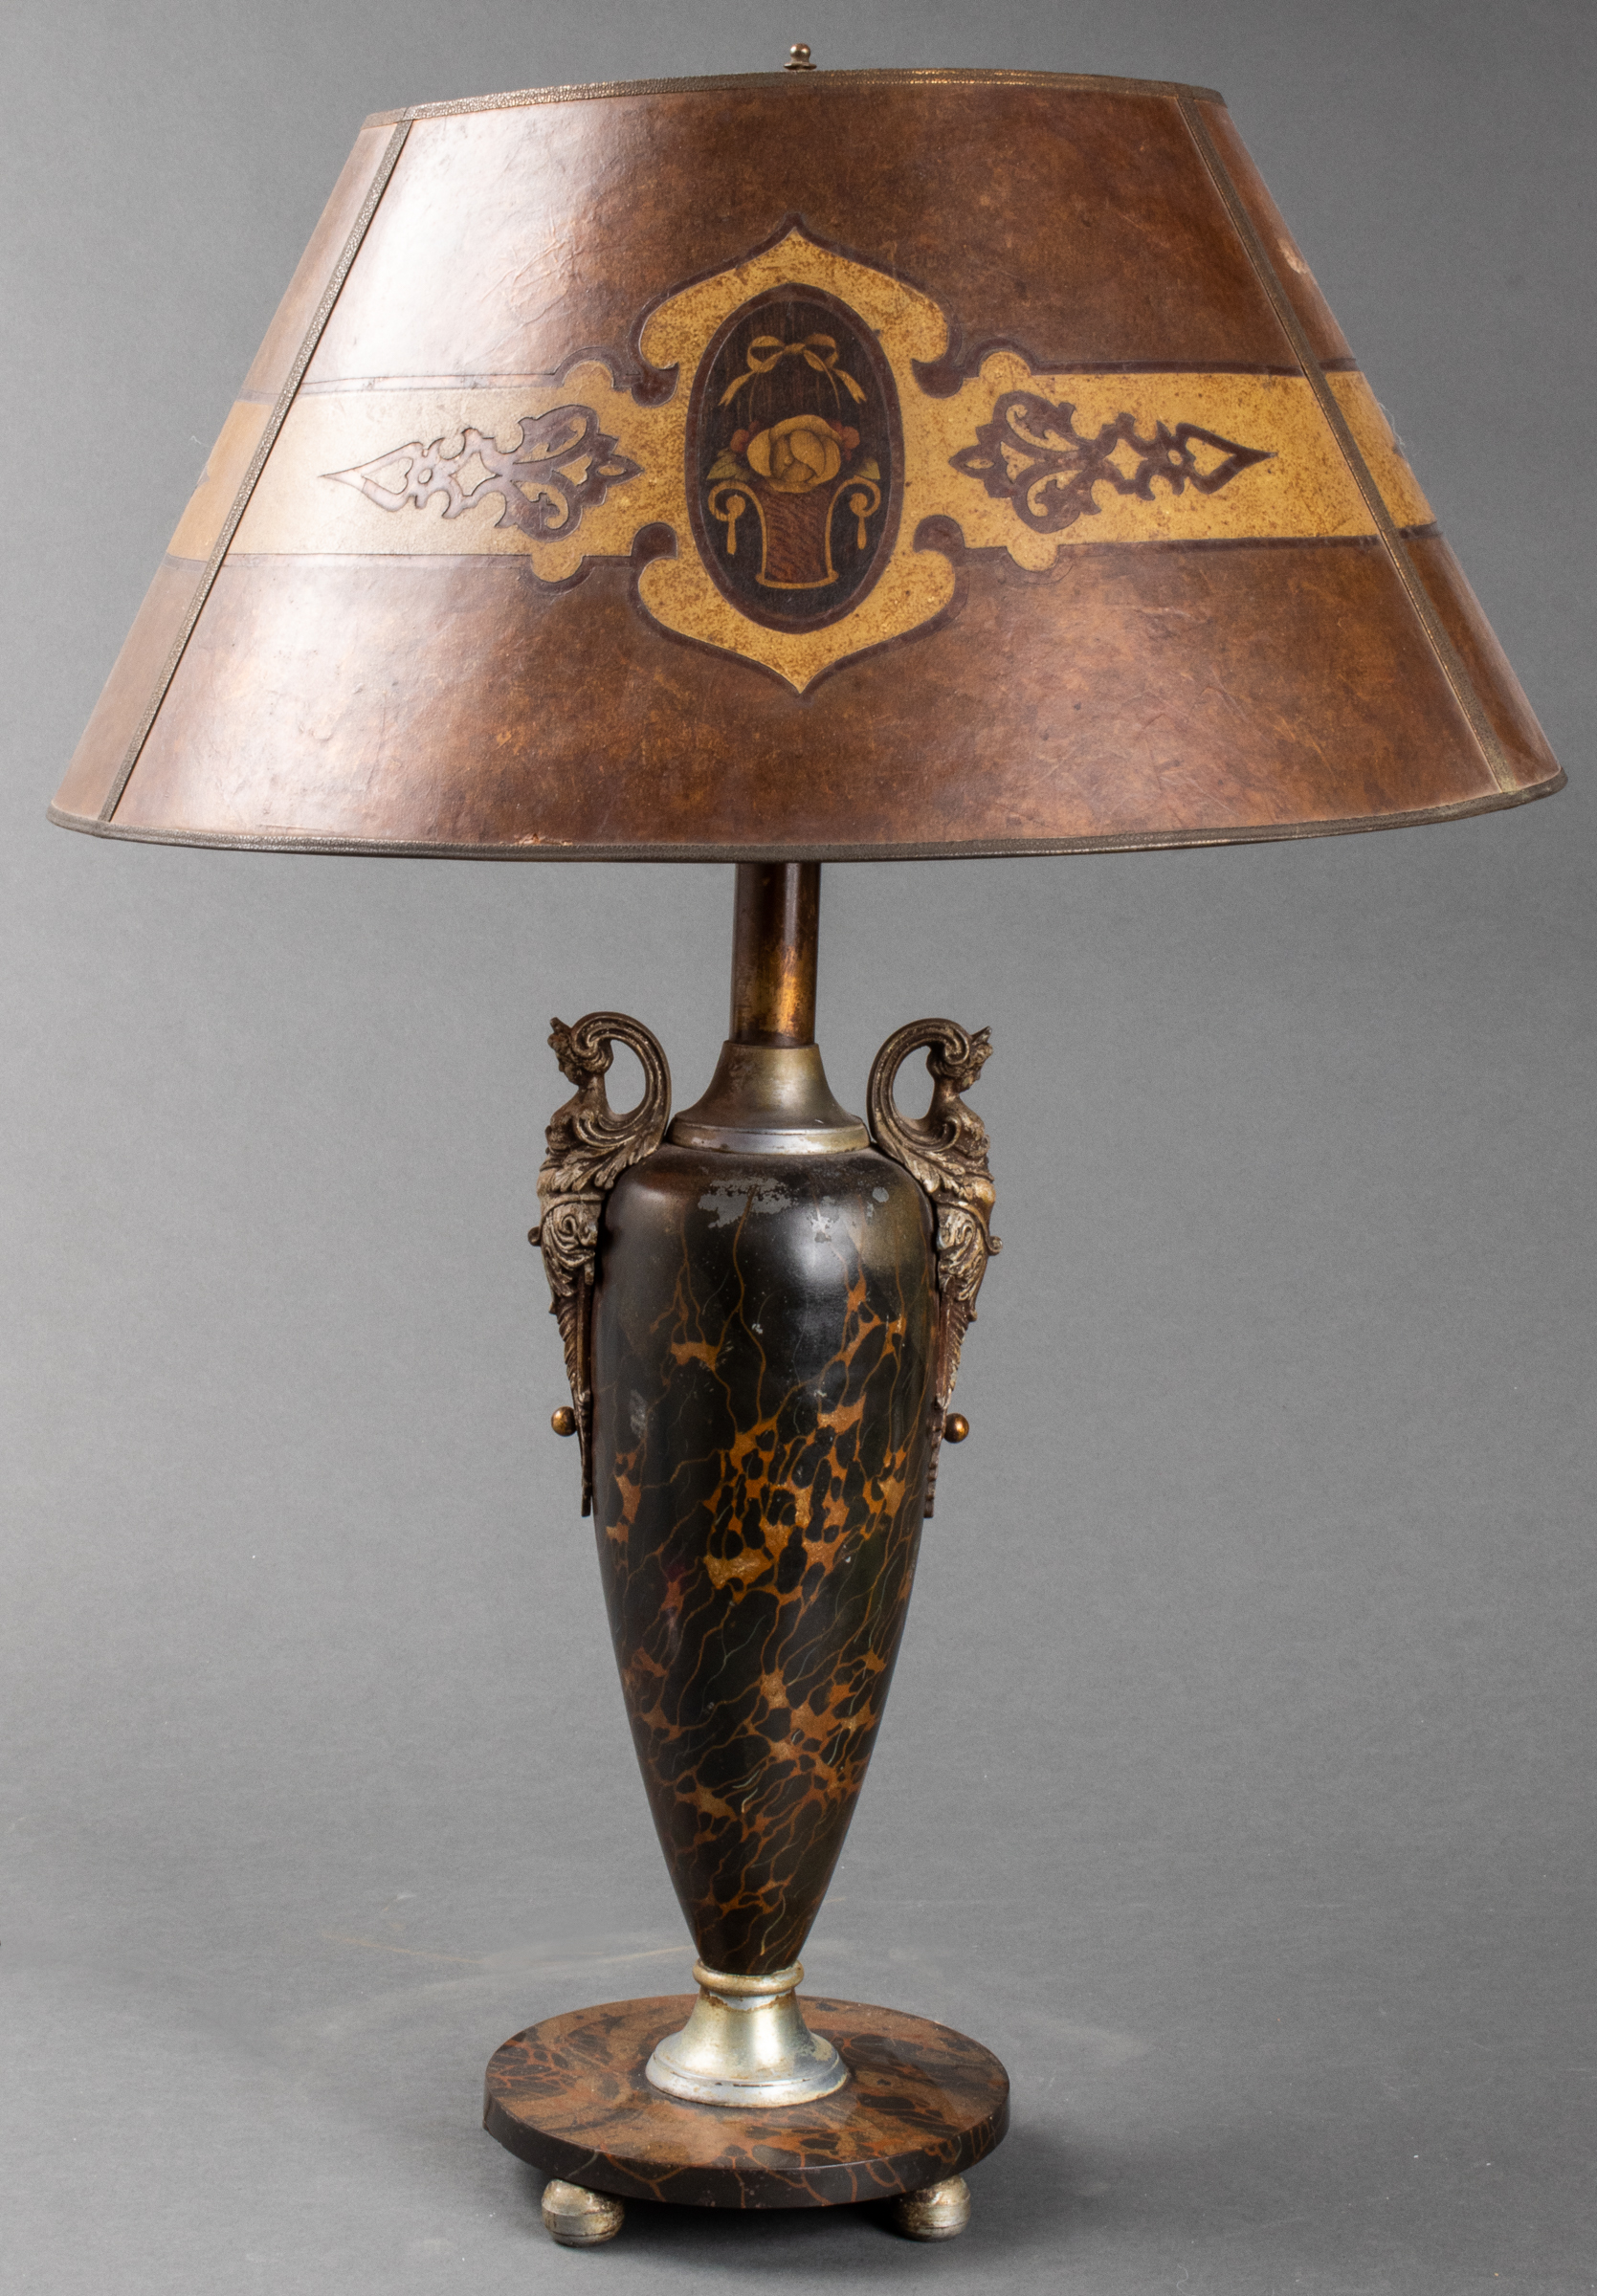 ROCOCO REVIVAL TABLE LAMP WITH